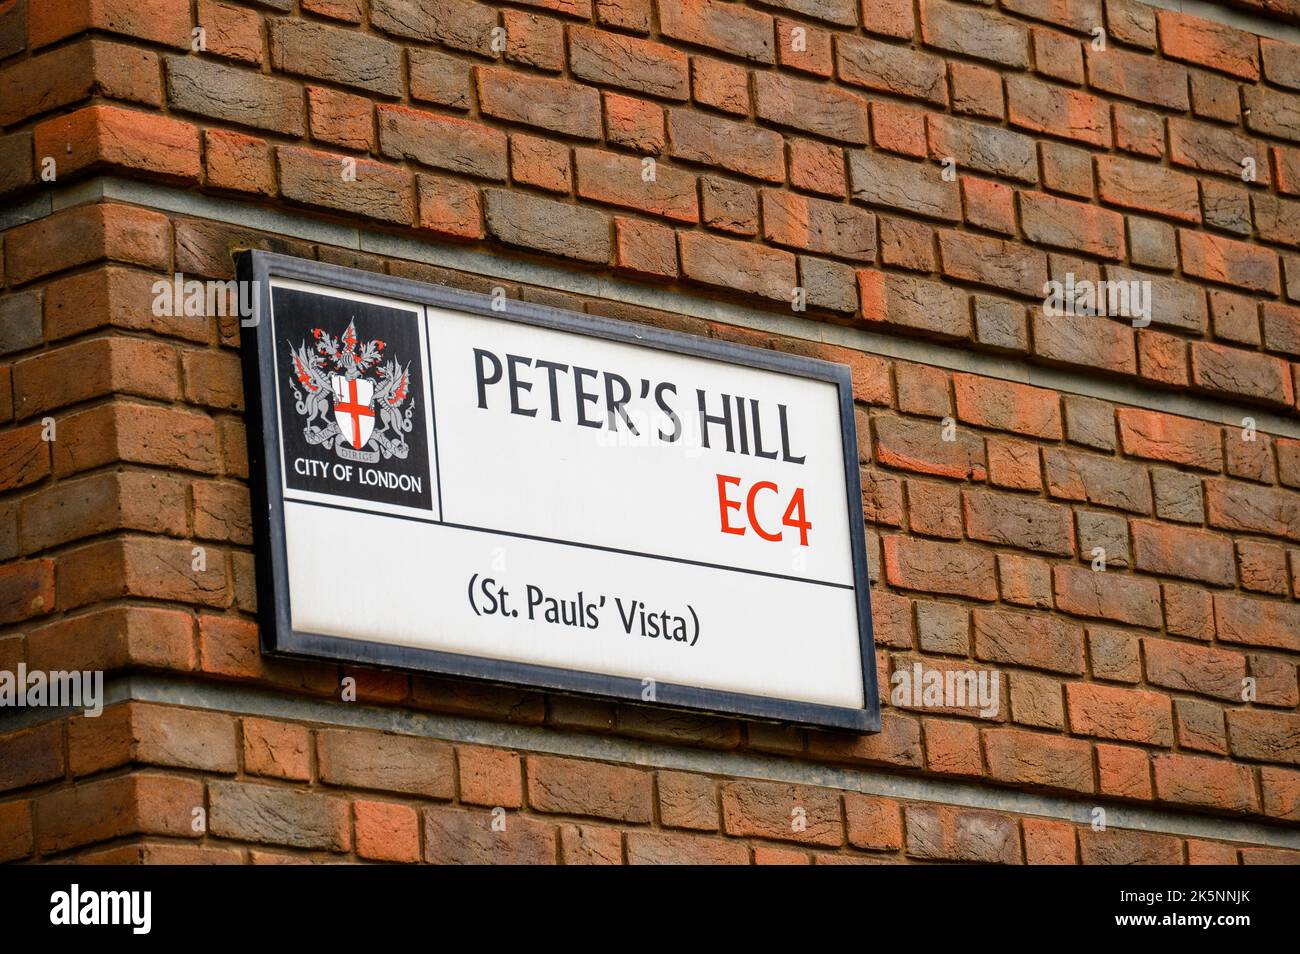 LONDON - May 21, 2022: Peter's Hill EC4 street sign on side of red brick building Stock Photo